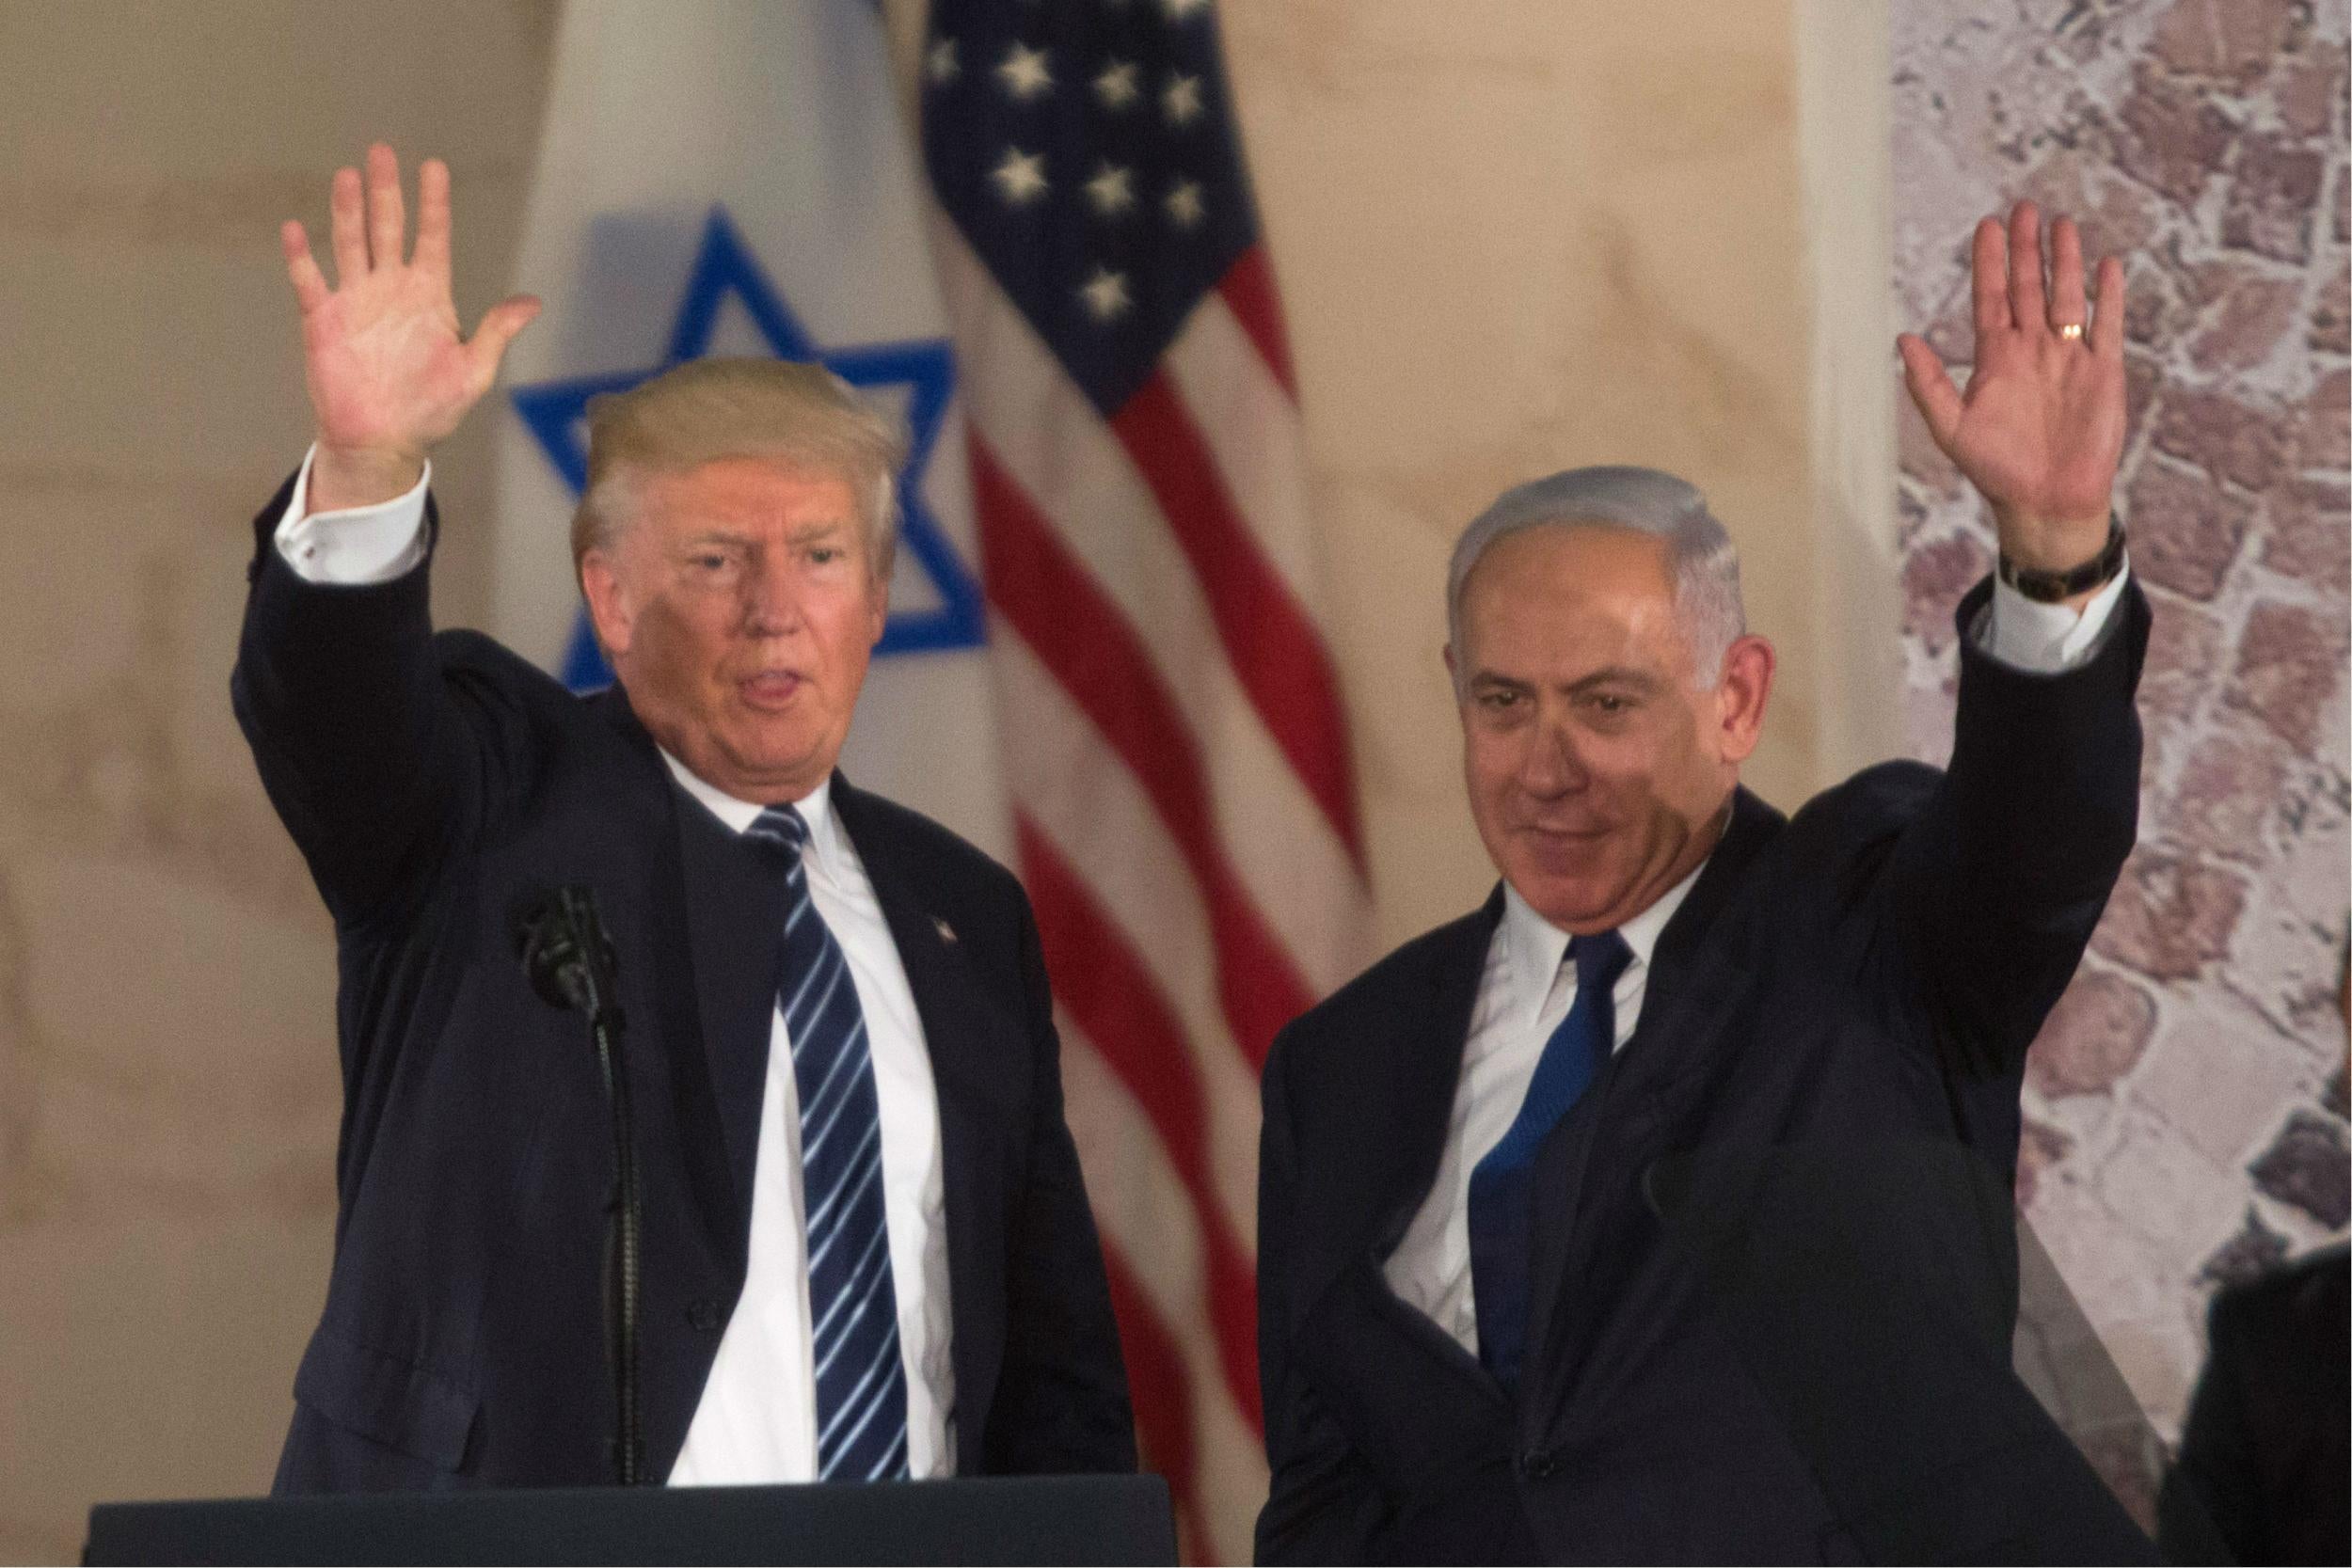 Donald Trump did not address the Israeli parliament because the White House was concerned about heckling and interruptions